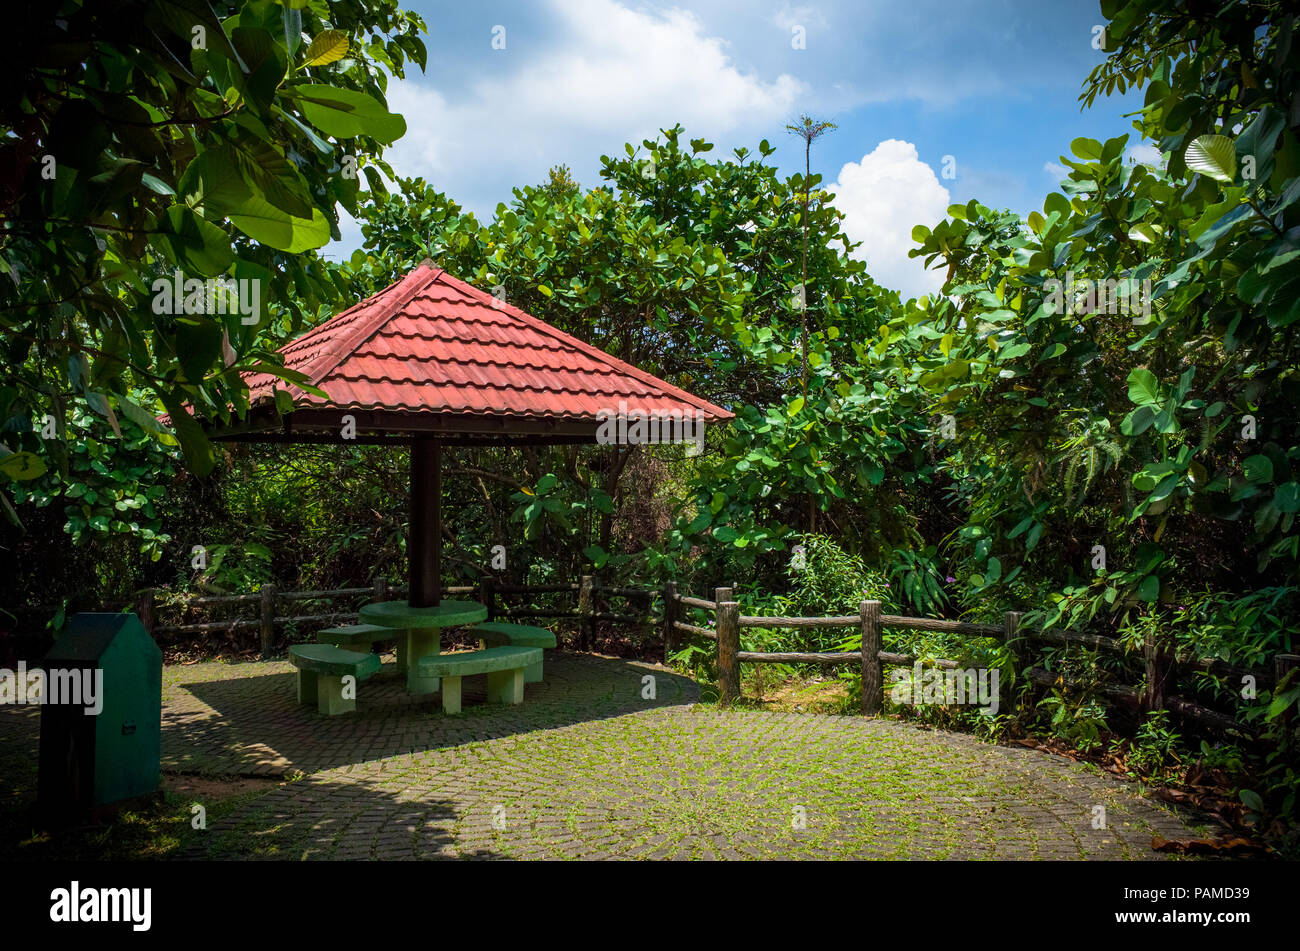 Shady resting area on the trail at Bukit Batok Public Nature Park in Singapore Stock Photo